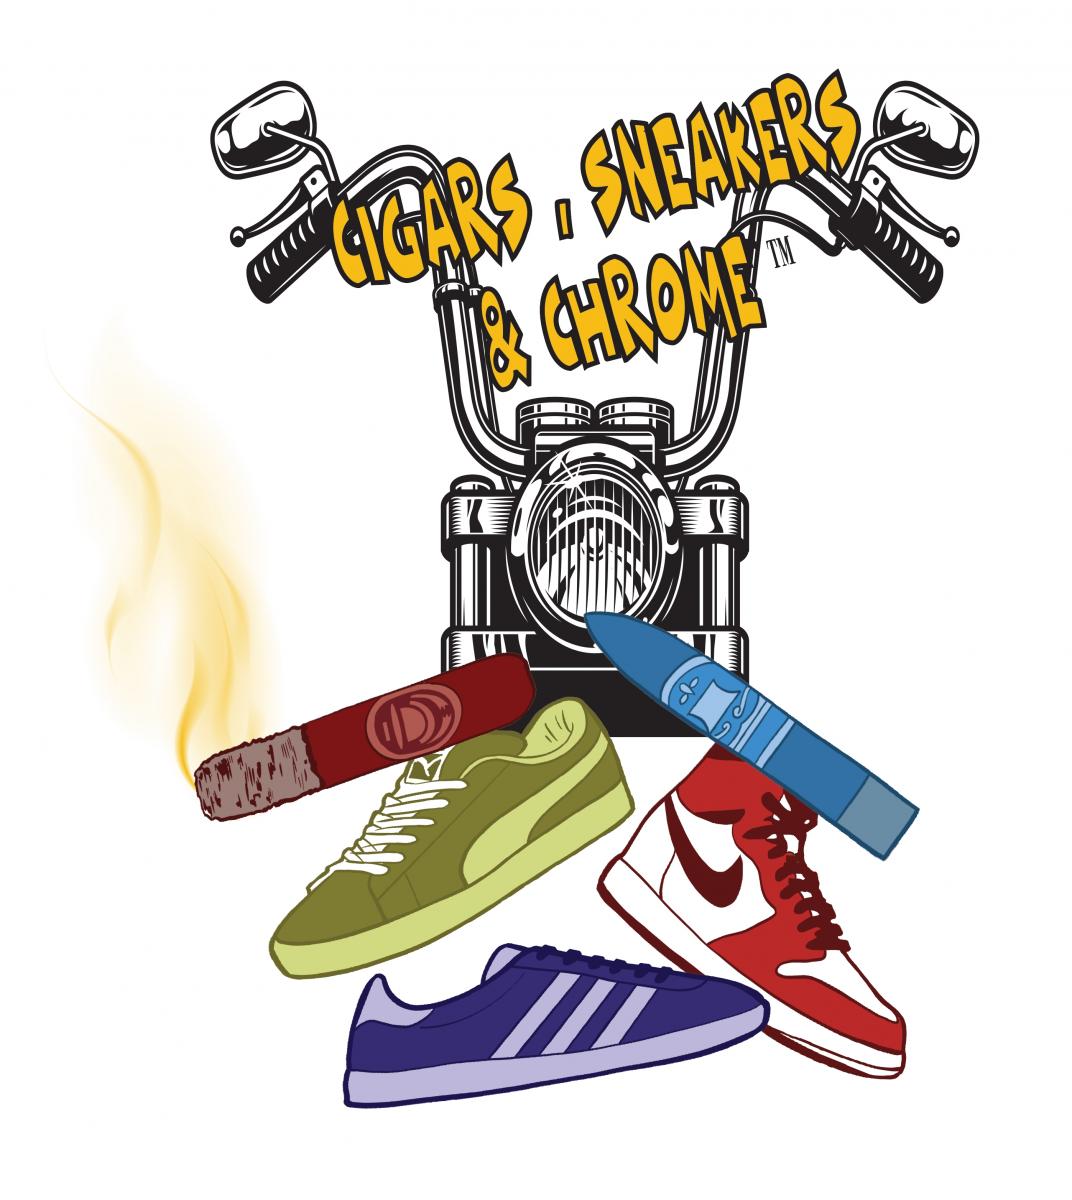 Cigars, Sneakers & Chrome